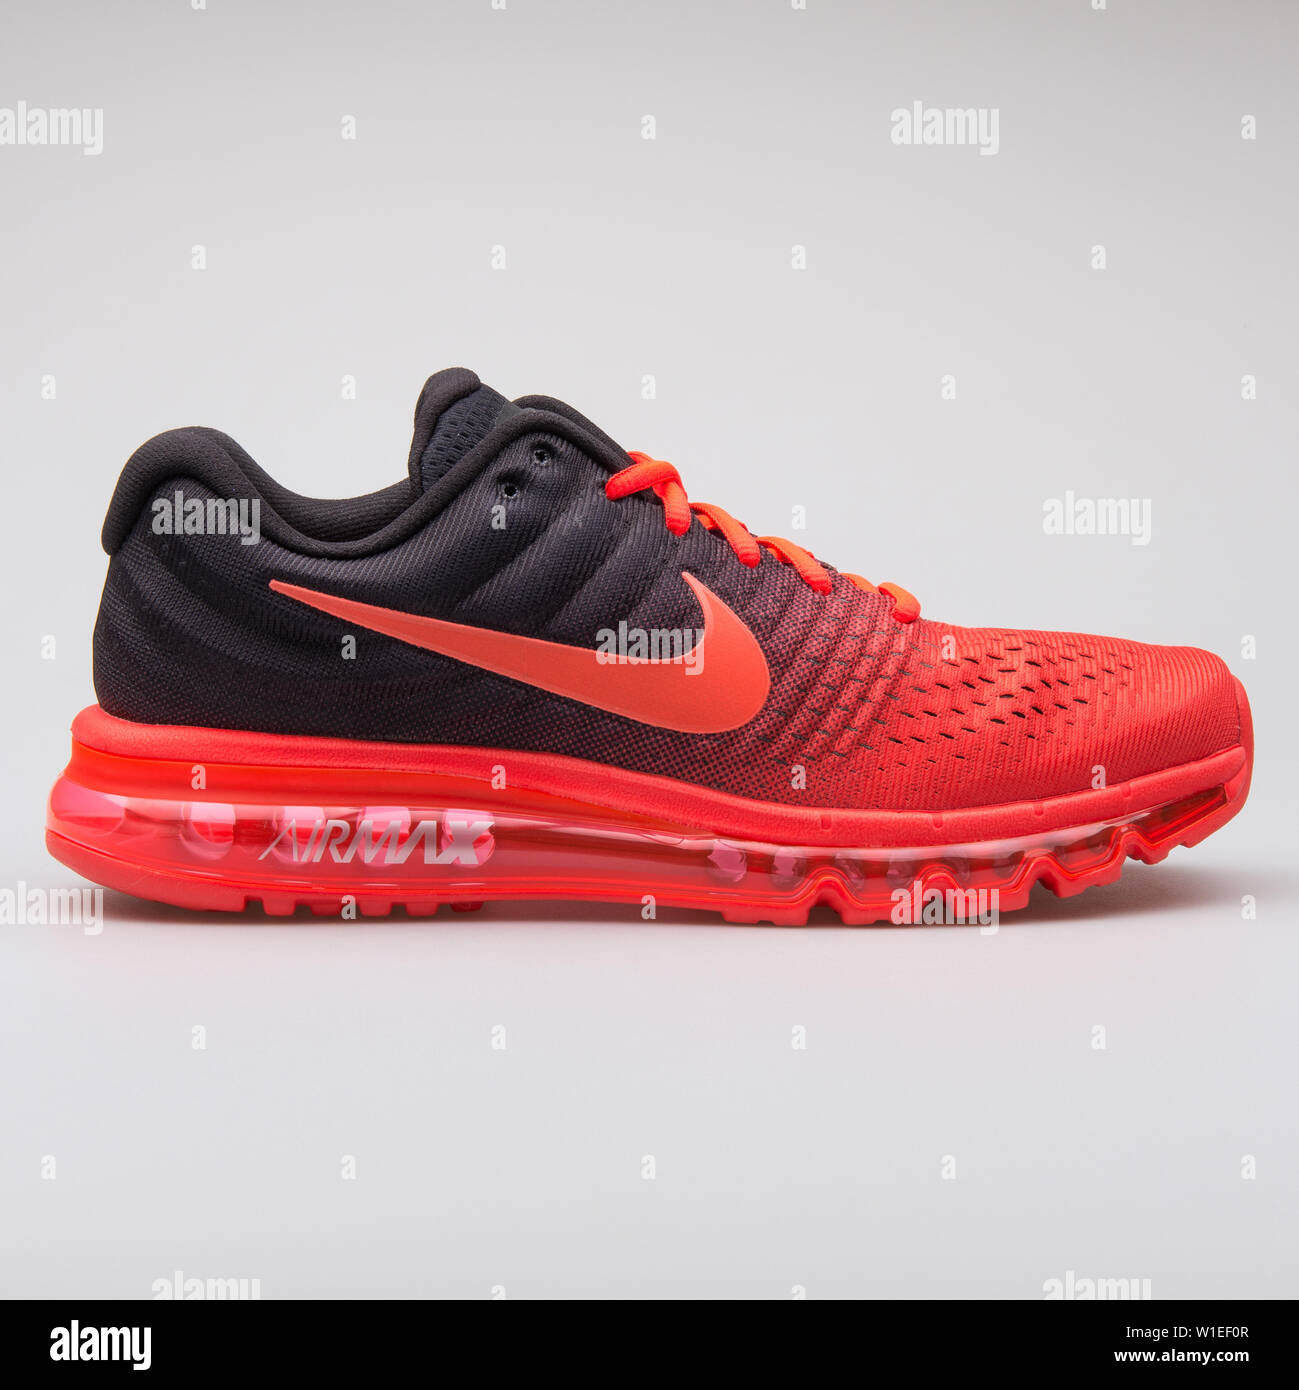 VIENNA, AUSTRIA - AUGUST 7, 2017: Nike Air Max 2017 black and red sneaker  on white background Stock Photo - Alamy